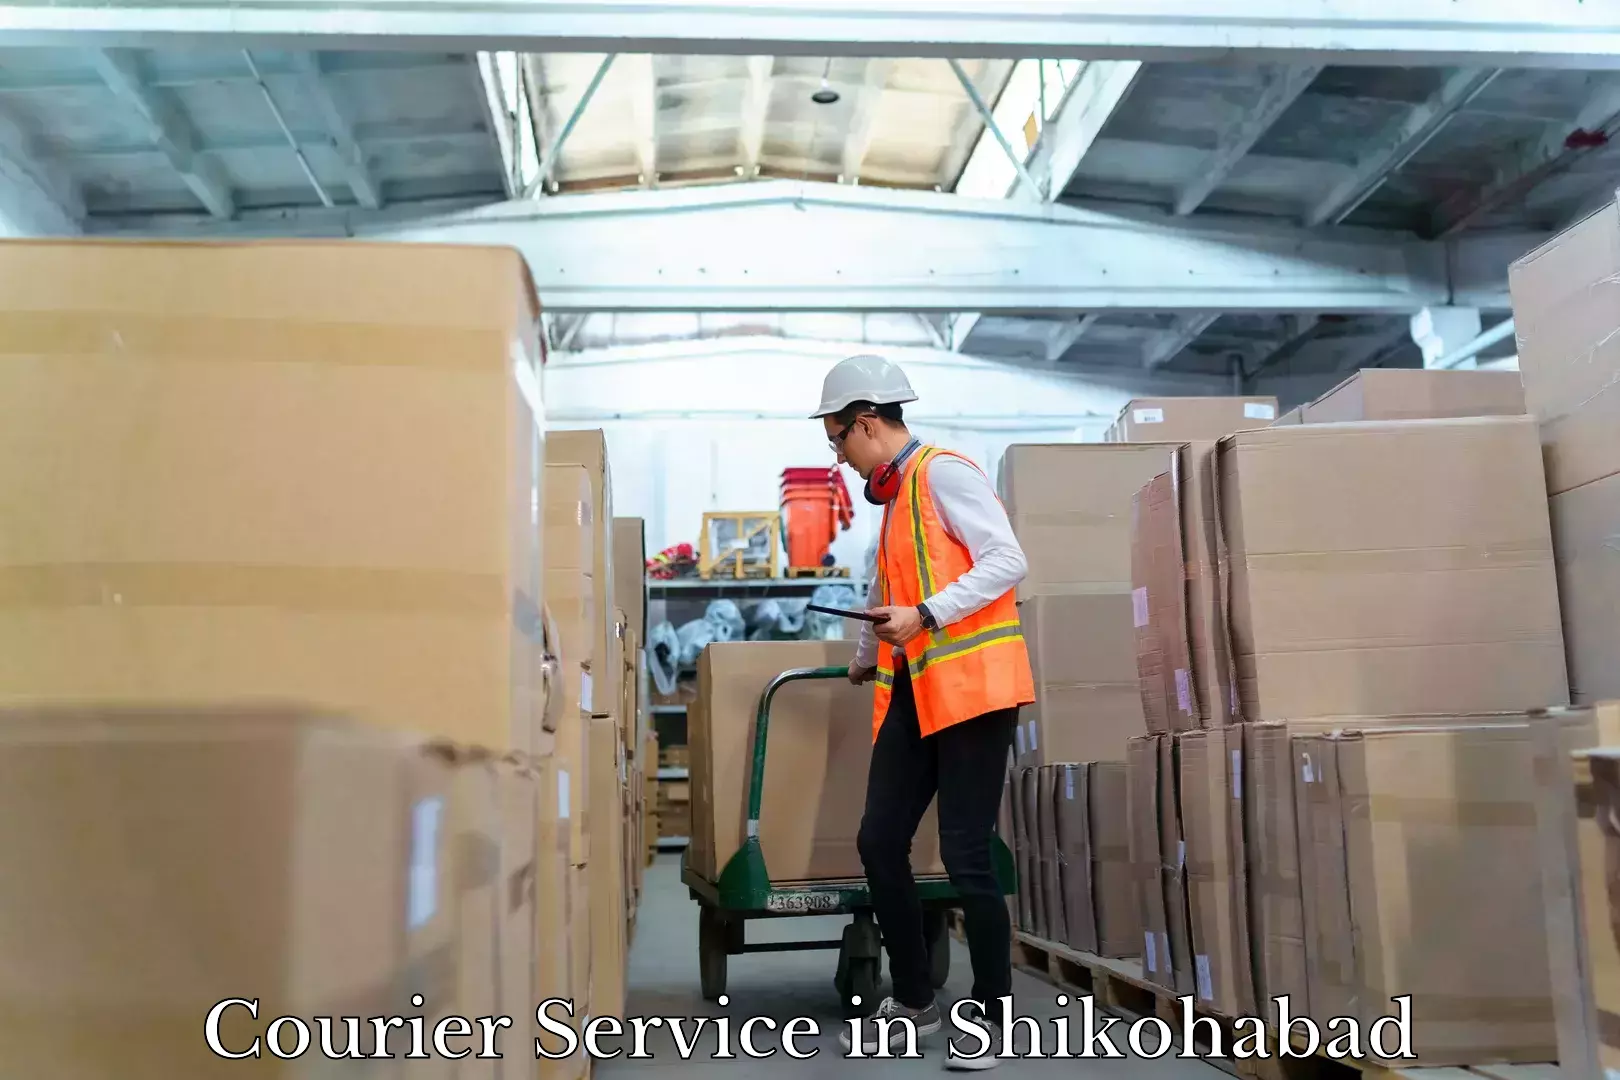 International courier networks in Shikohabad